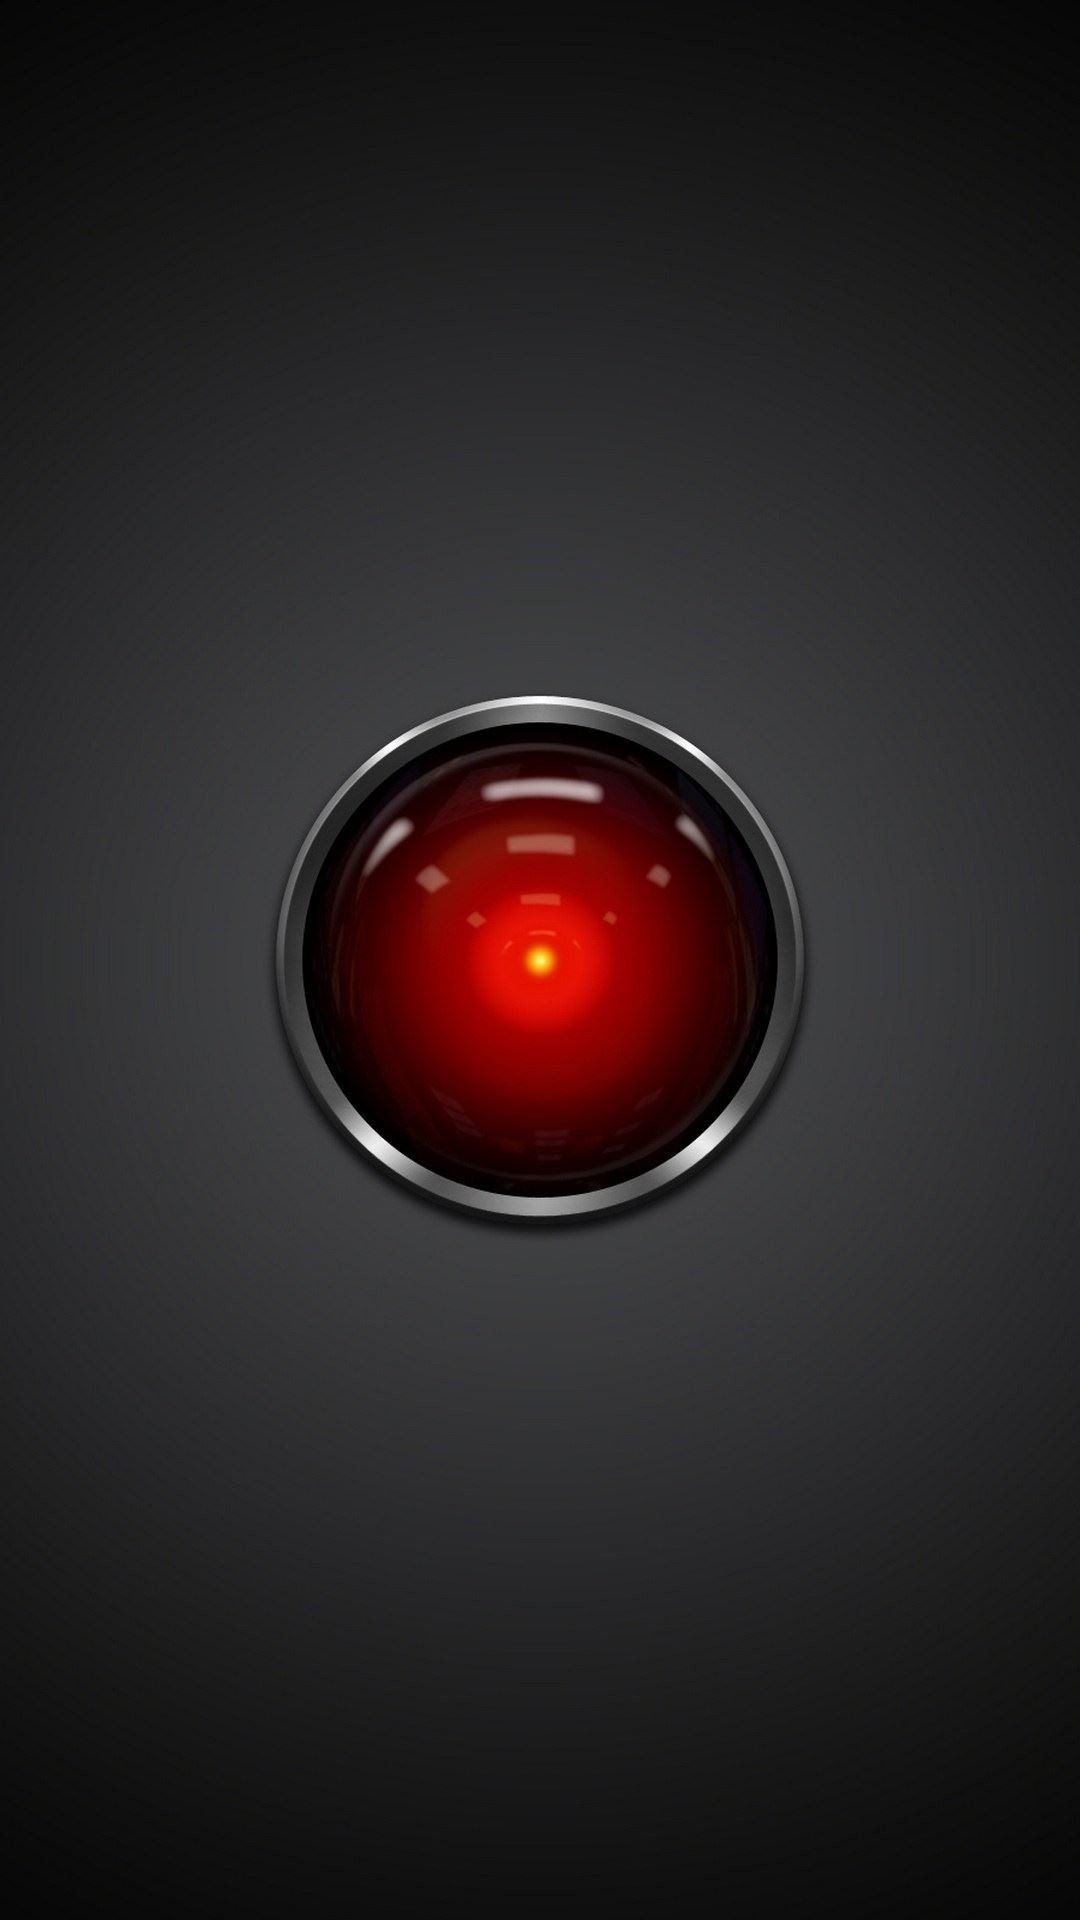 1080x1920 HAL 9000 2001 A Space Odyssey iPhone 6 Plus HD Wallpaper